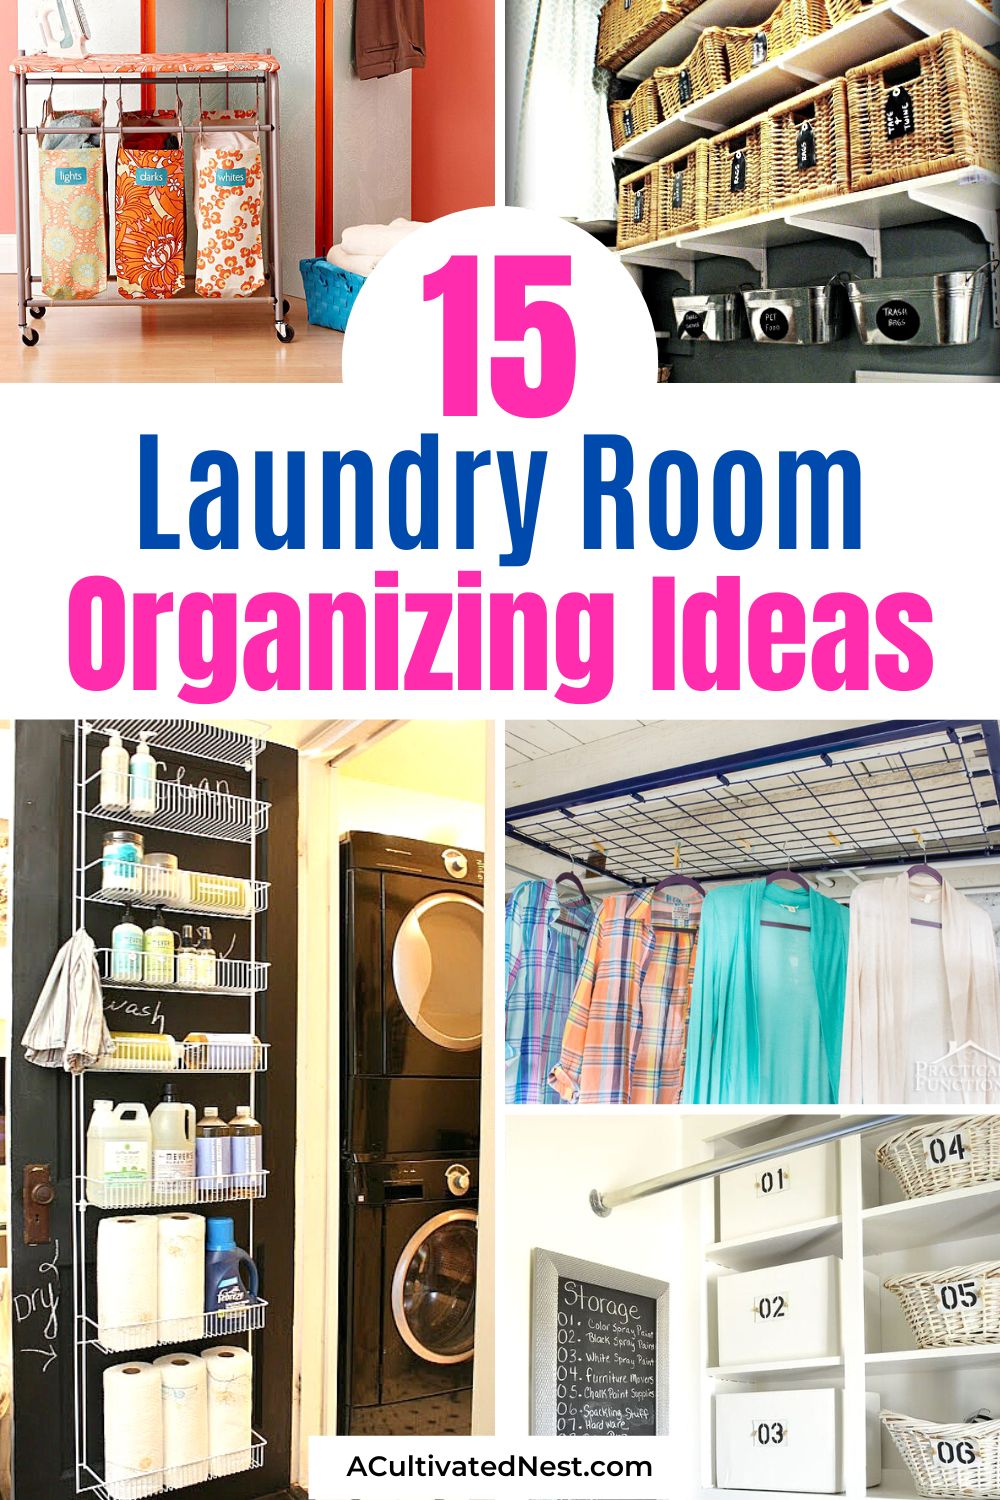 15 Laundry Room Organization Ideas- A Cultivated Nest